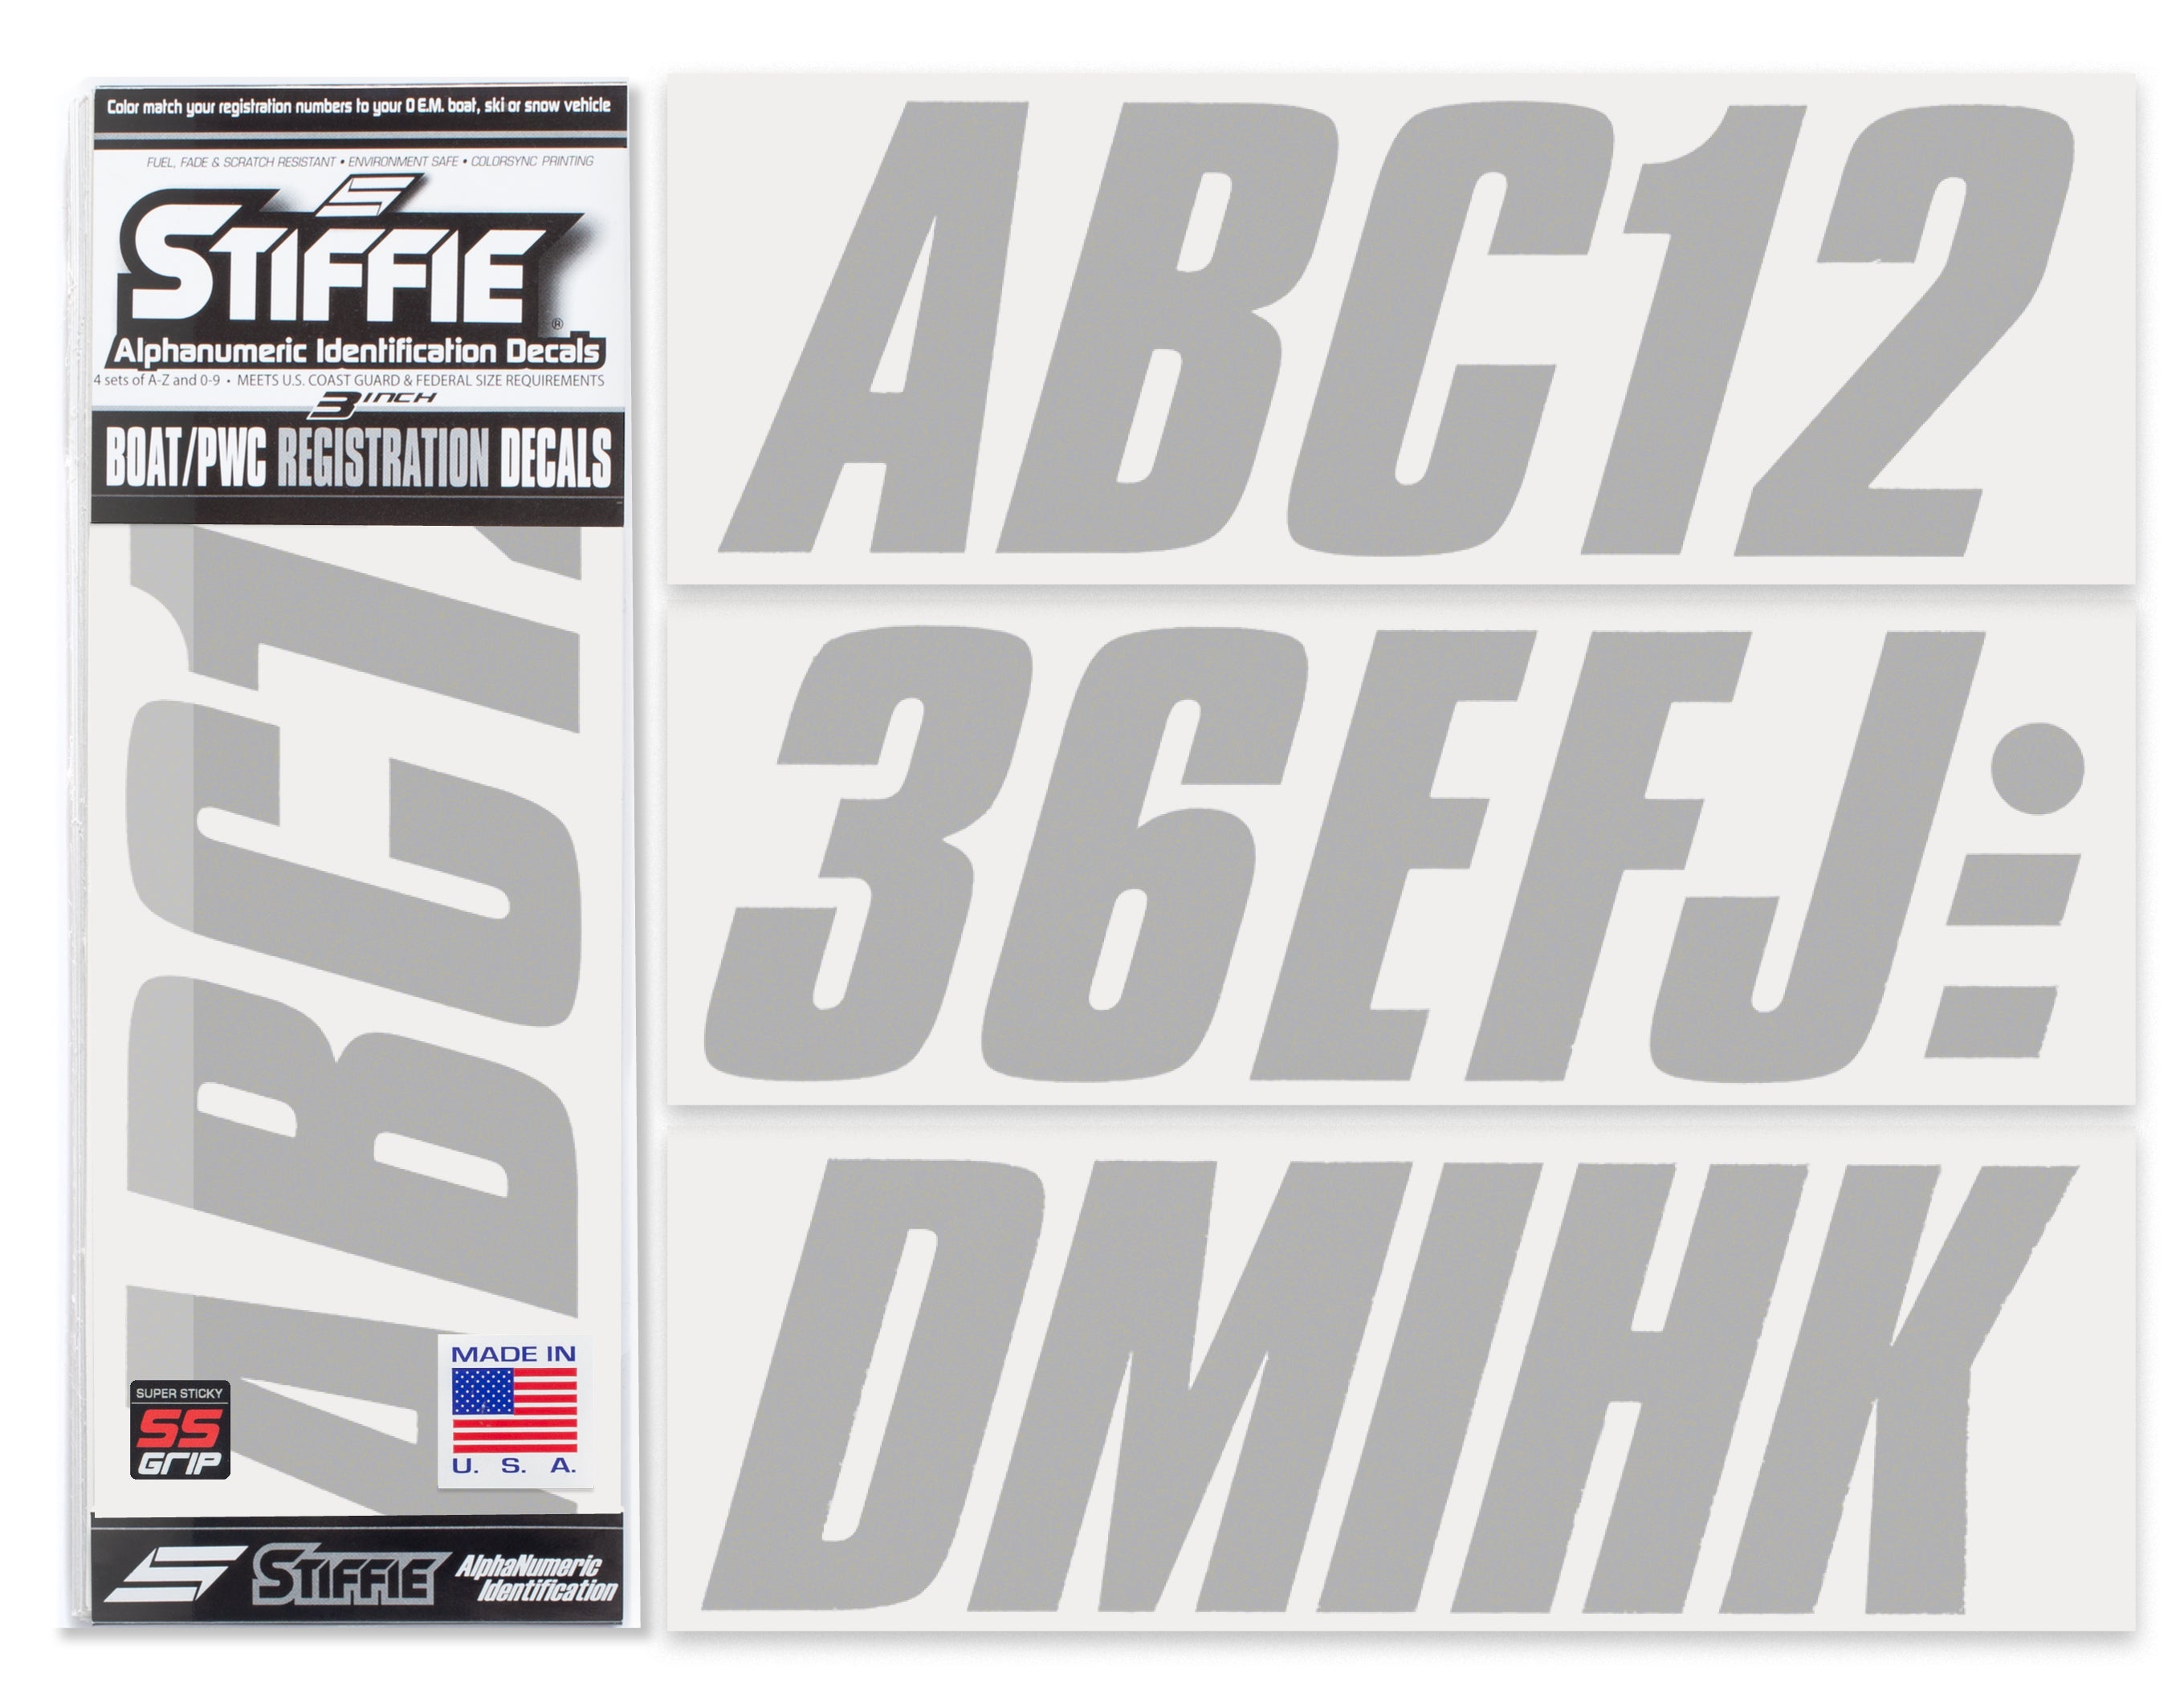 STIFFIE Shift Silver Super Sticky 3" Alpha Numeric Registration Identification Numbers Stickers Decals for Sea-Doo Spark, Inflatable Boats, Ribs, Hypalon/PVC, PWC and Boats.